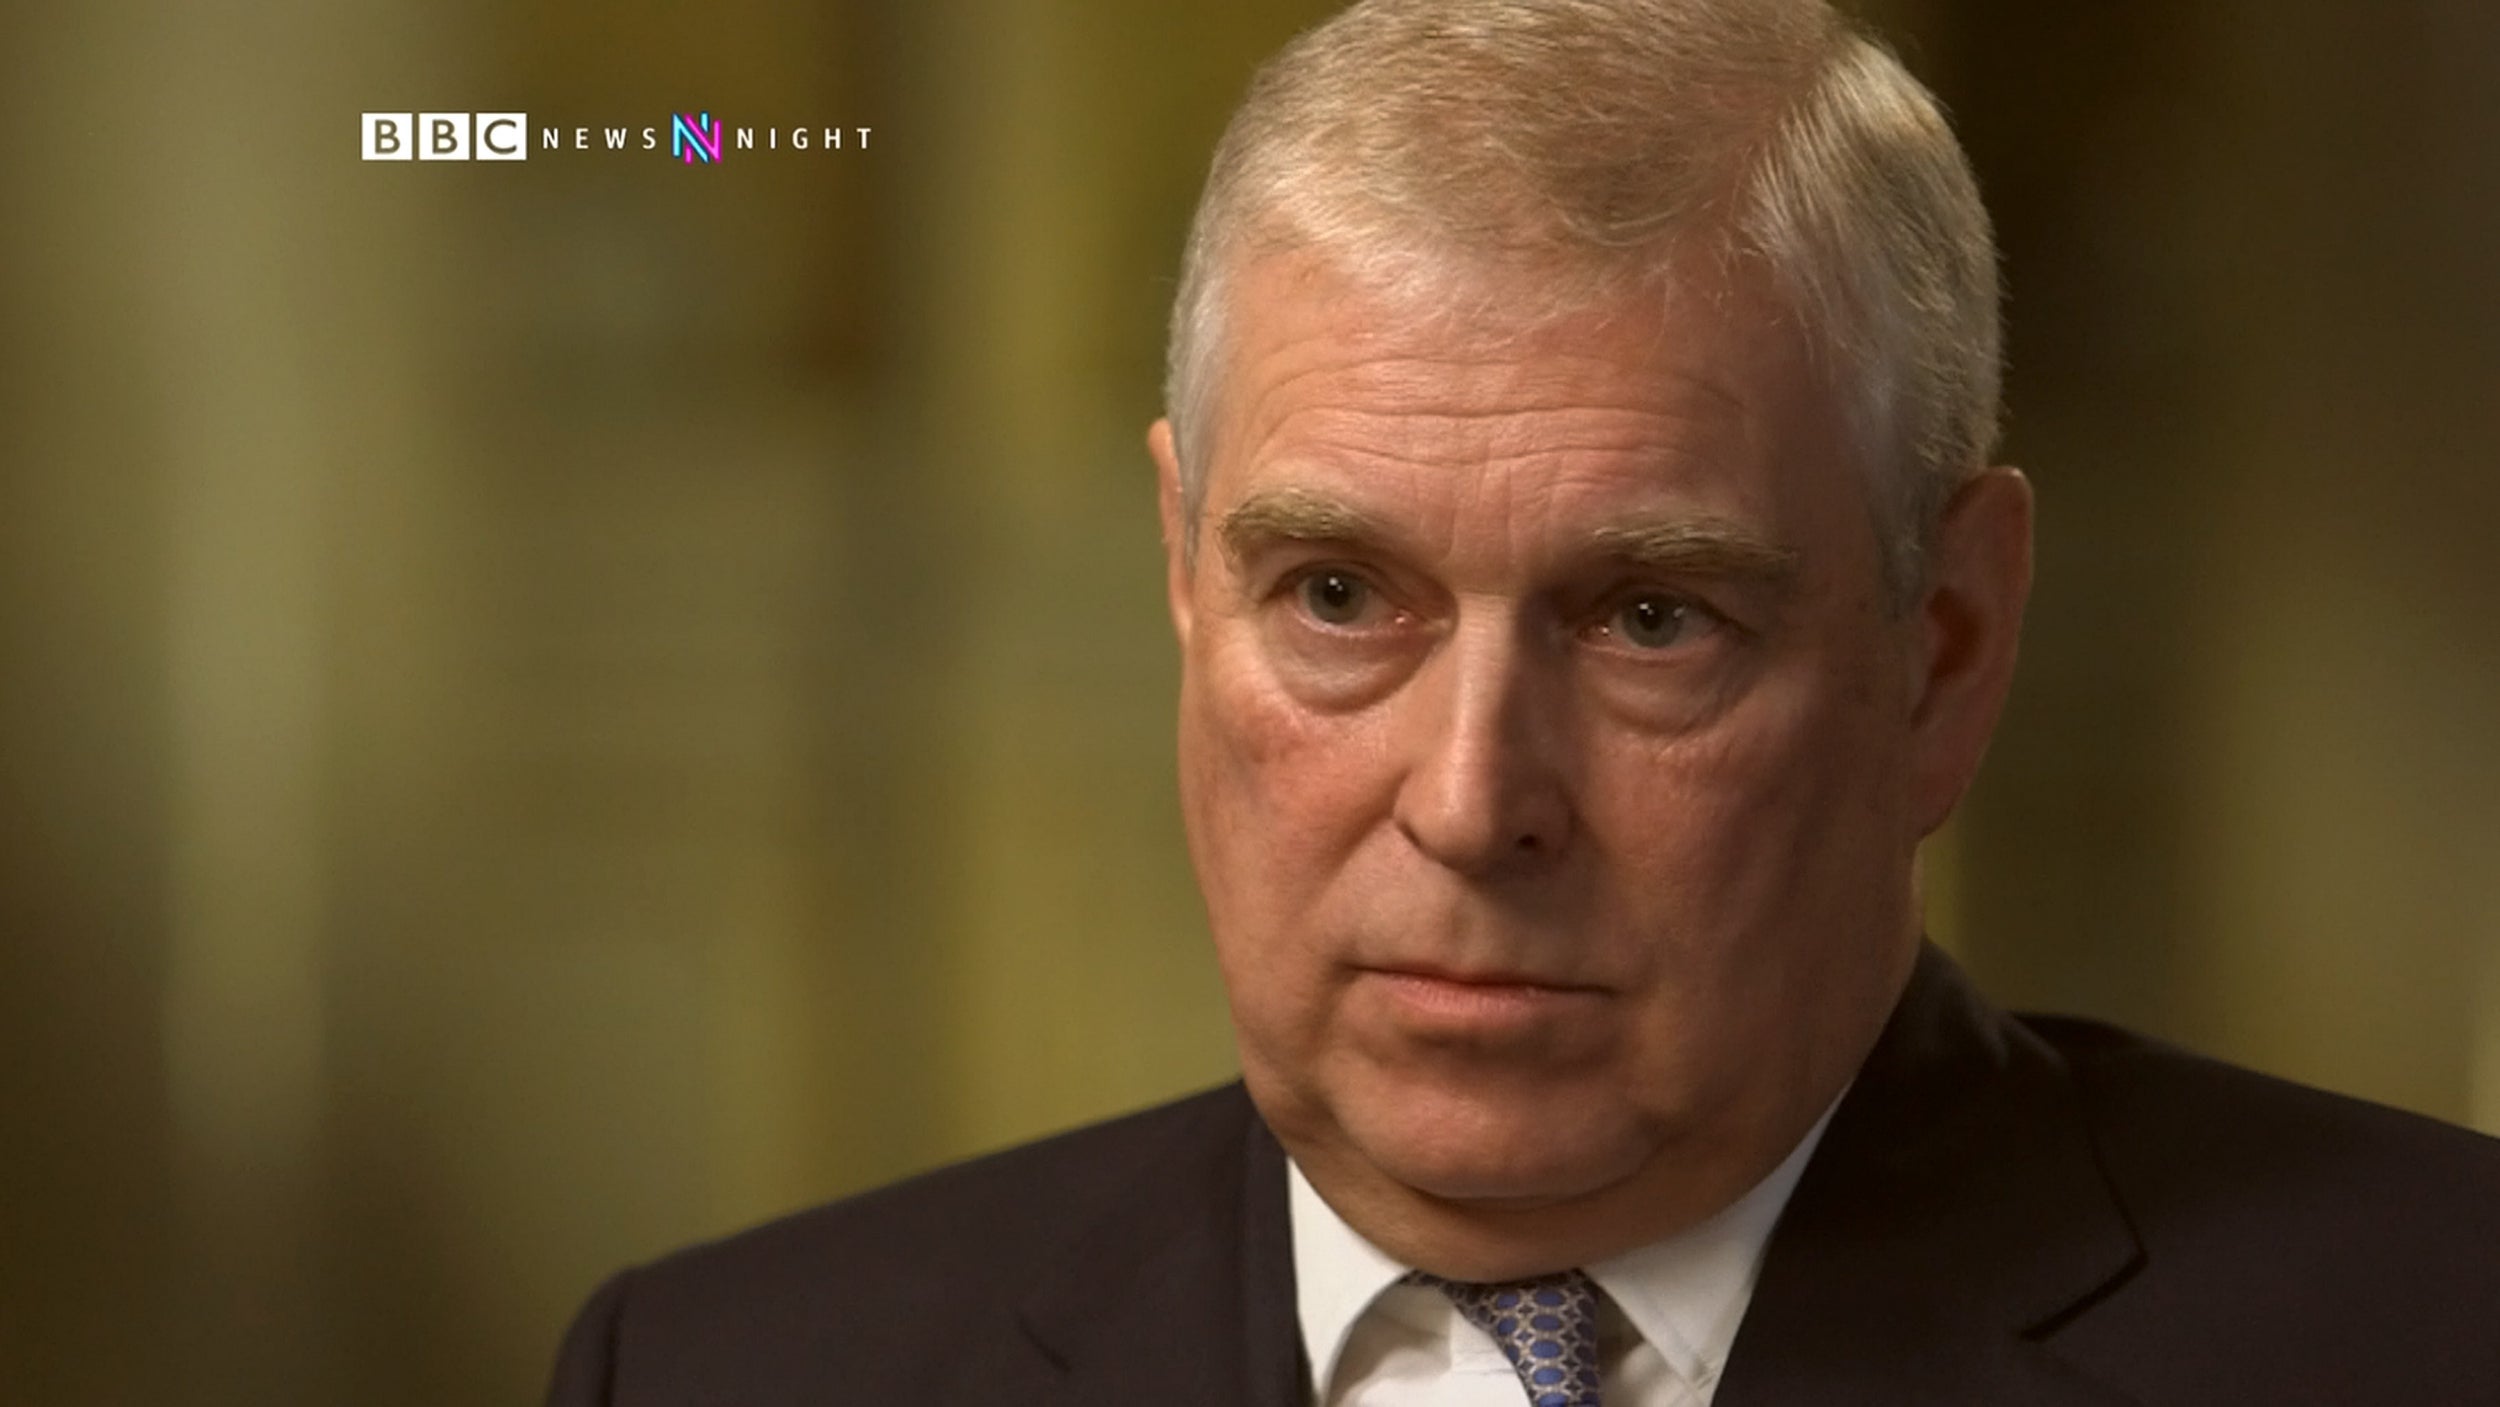 Prince Andrew in the infamous ‘Newsnight’ interview in 2019